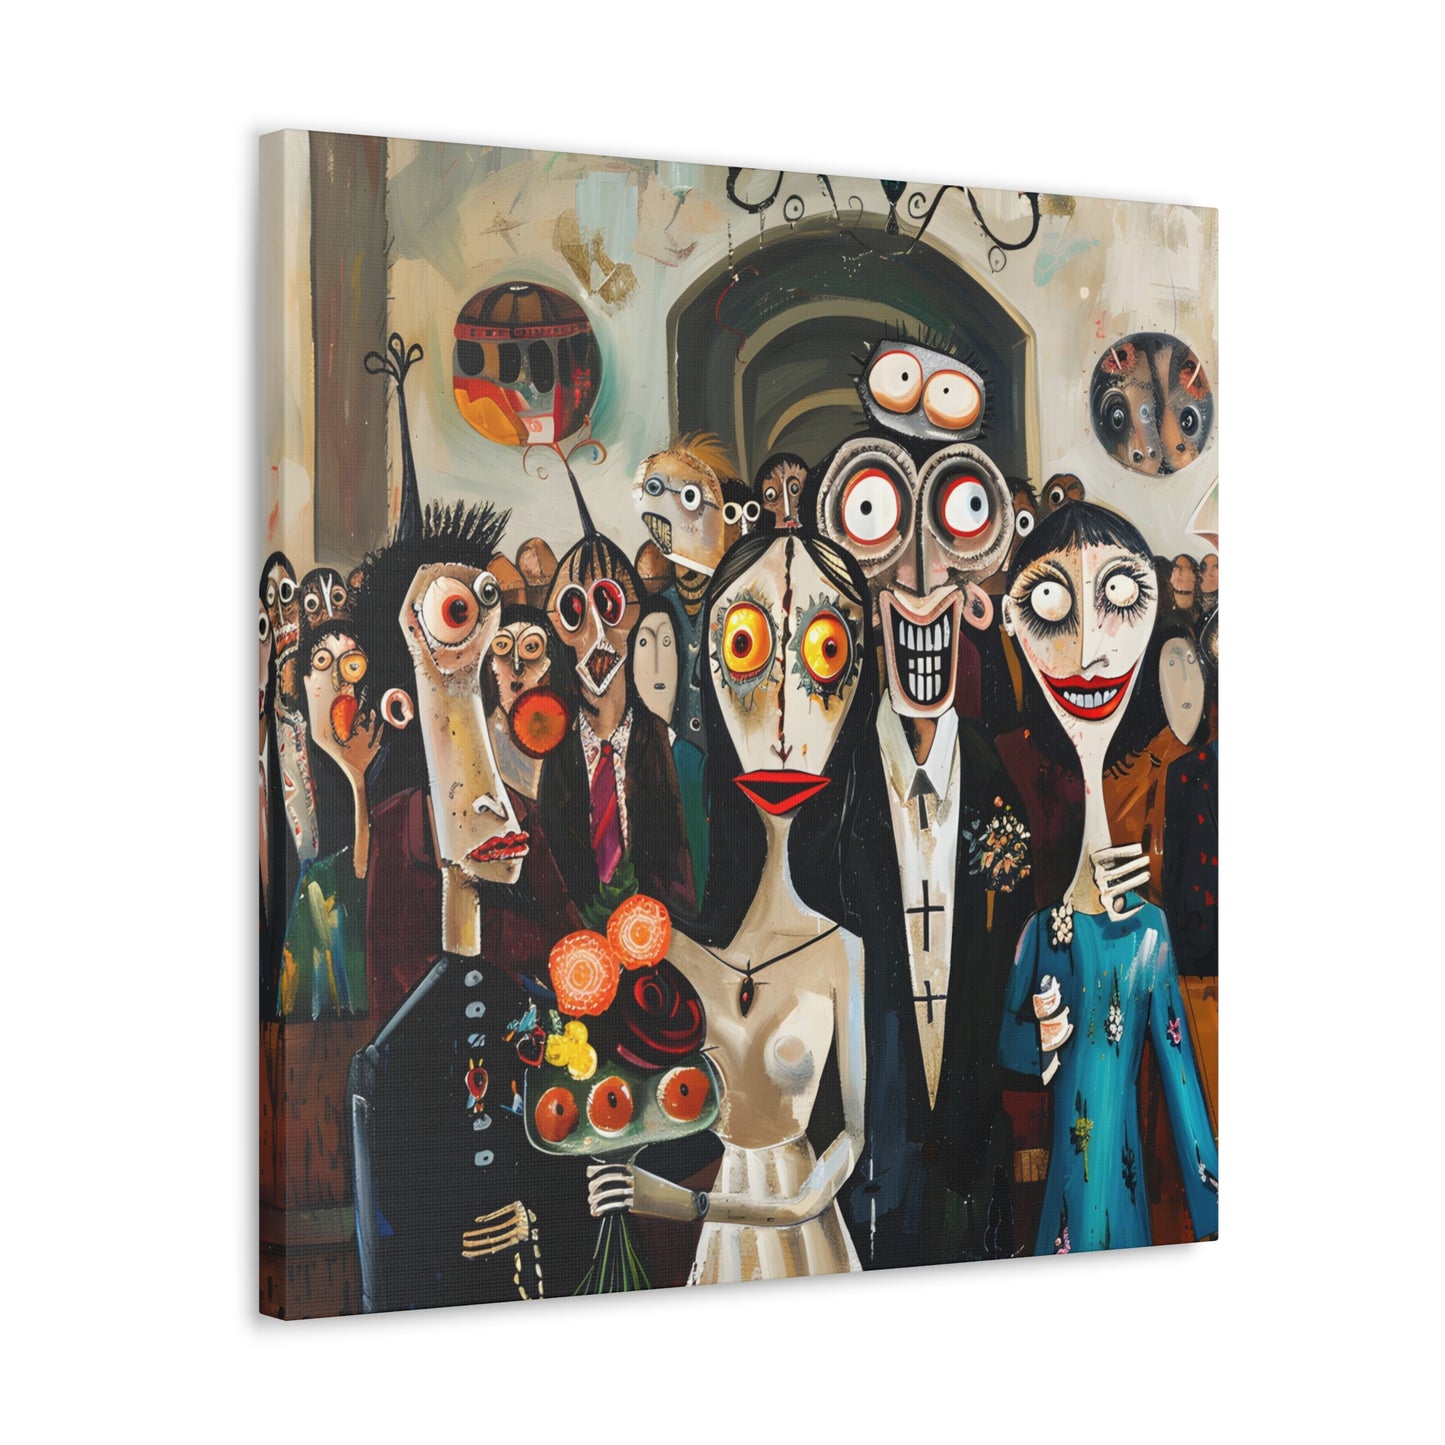 David Miller. The Eclectic Union, Exclusive Canvas Print